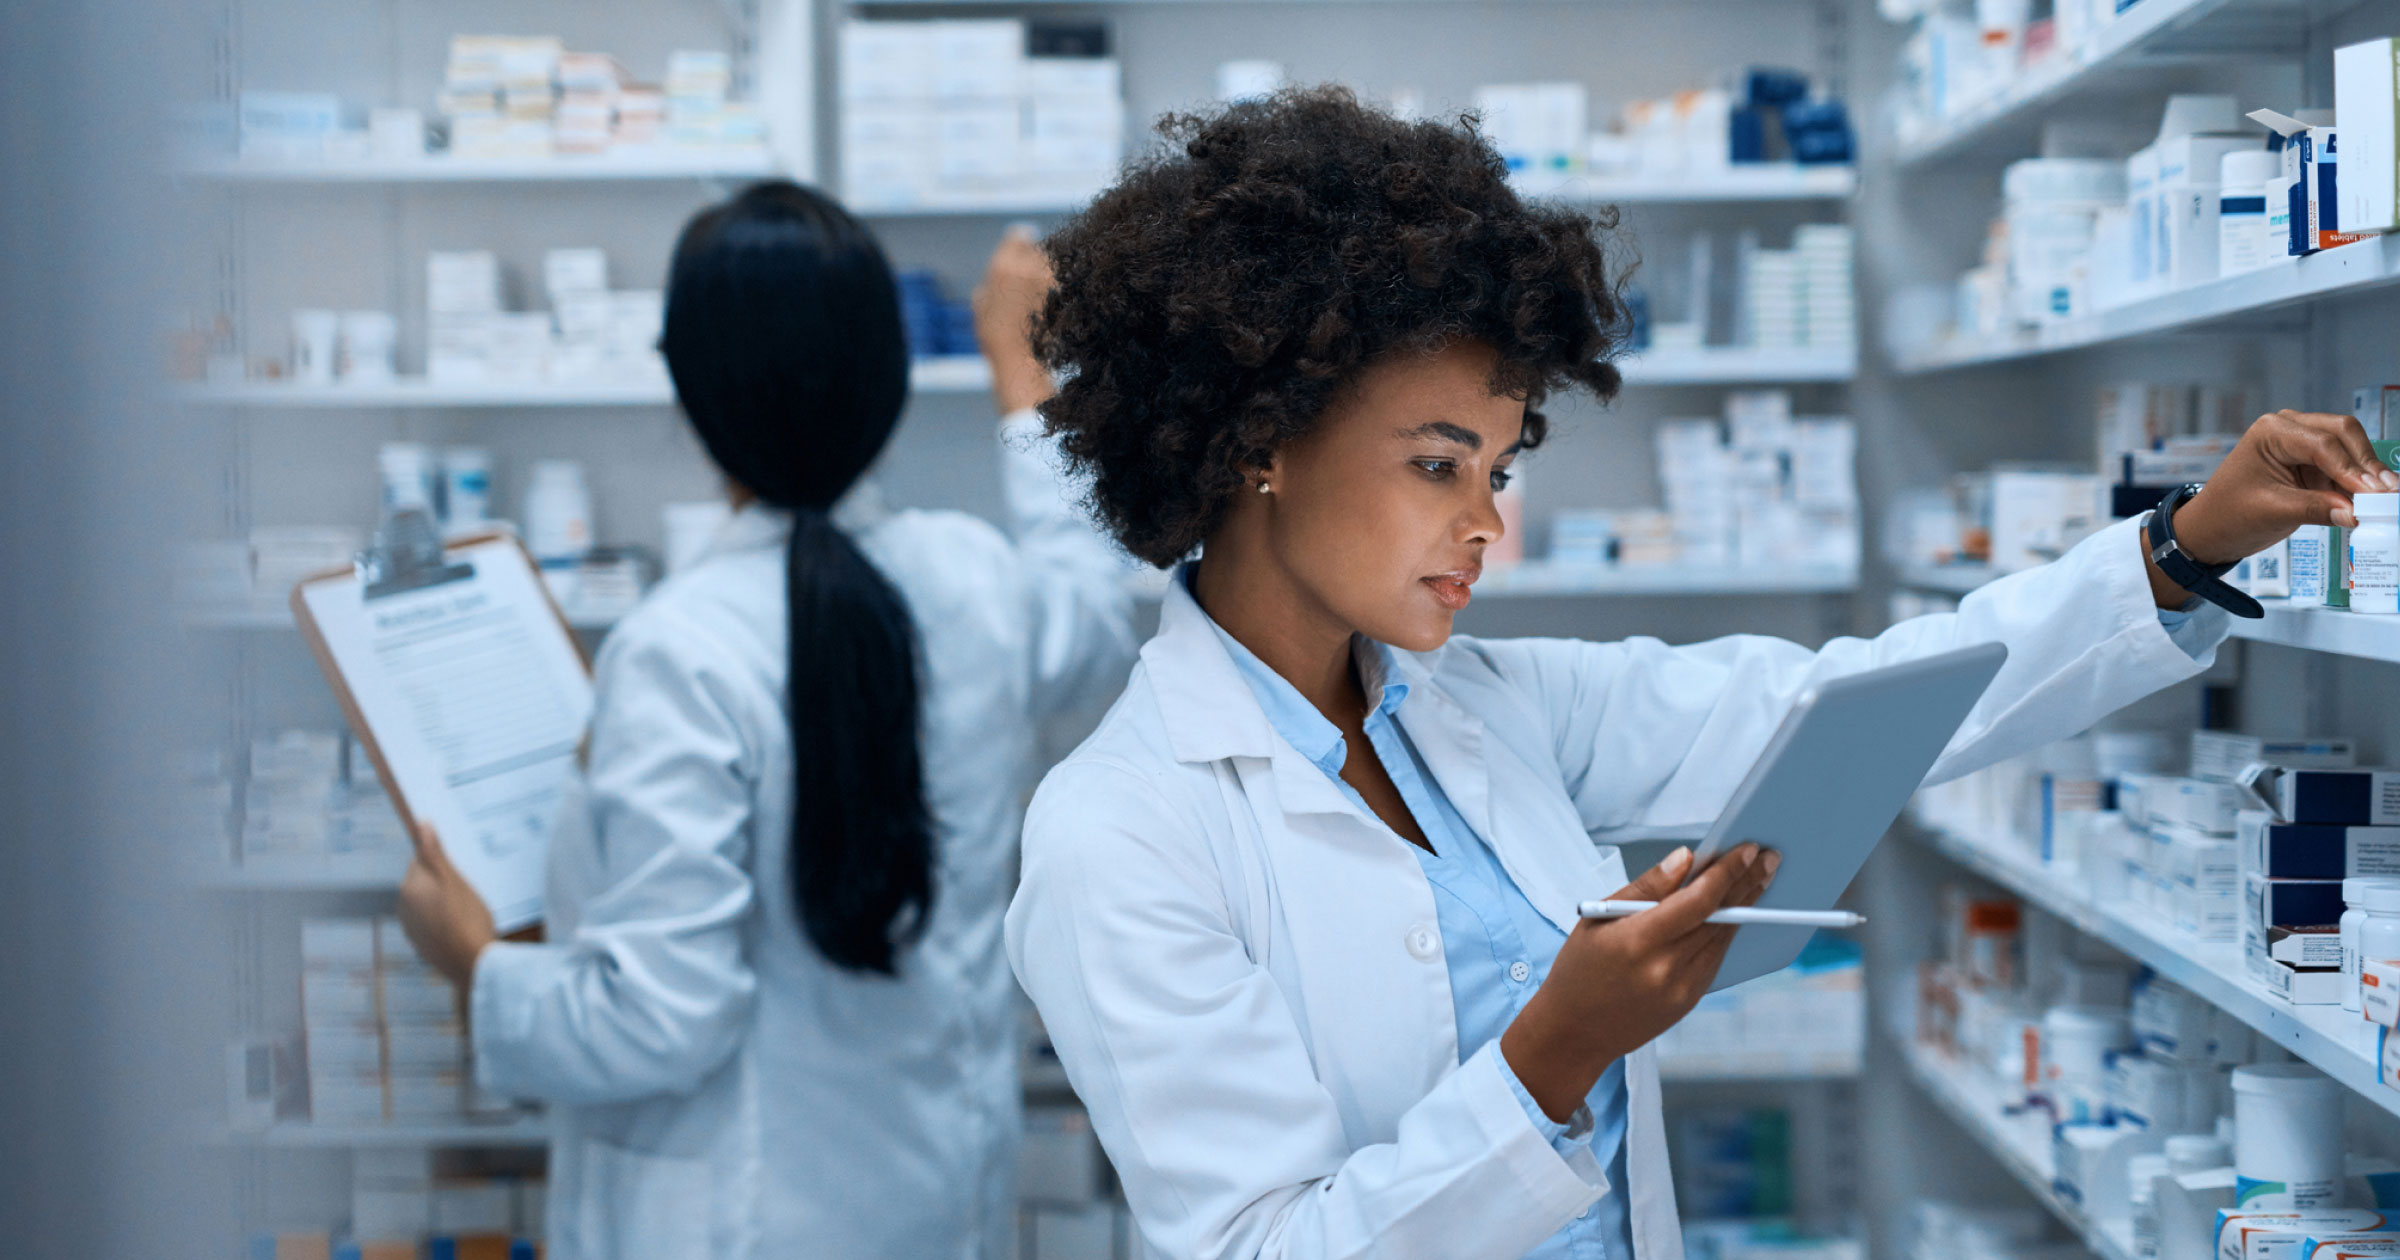 A photo of a pharmacist getting medication from a shelf for a patient.